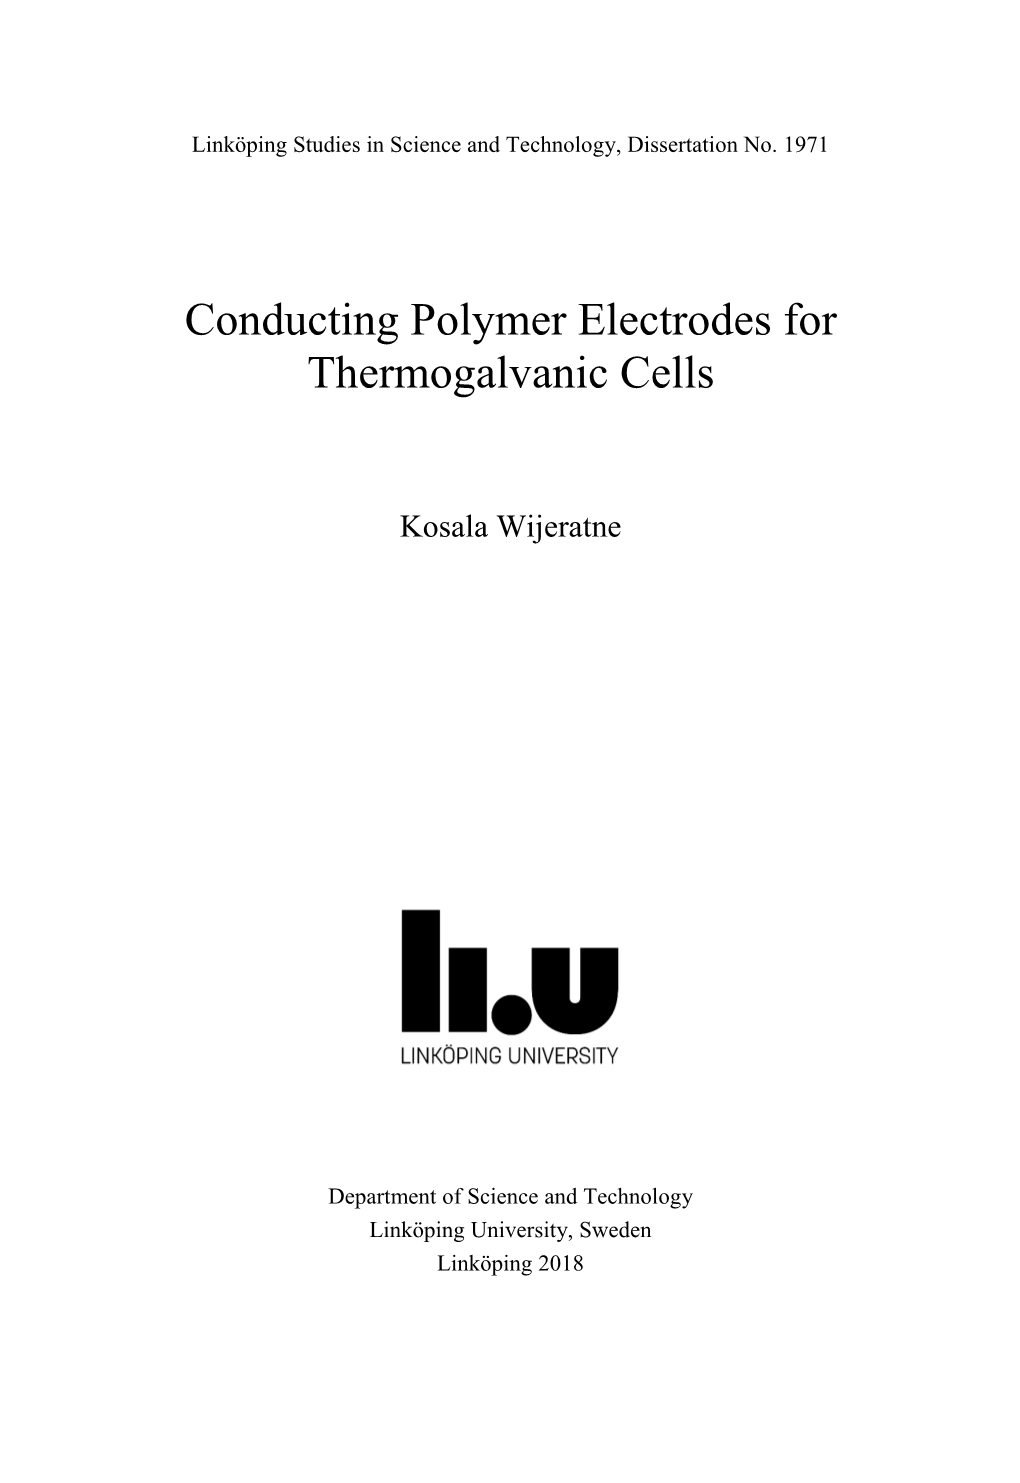 Conducting Polymer Electrodes for Thermogalvanic Cells